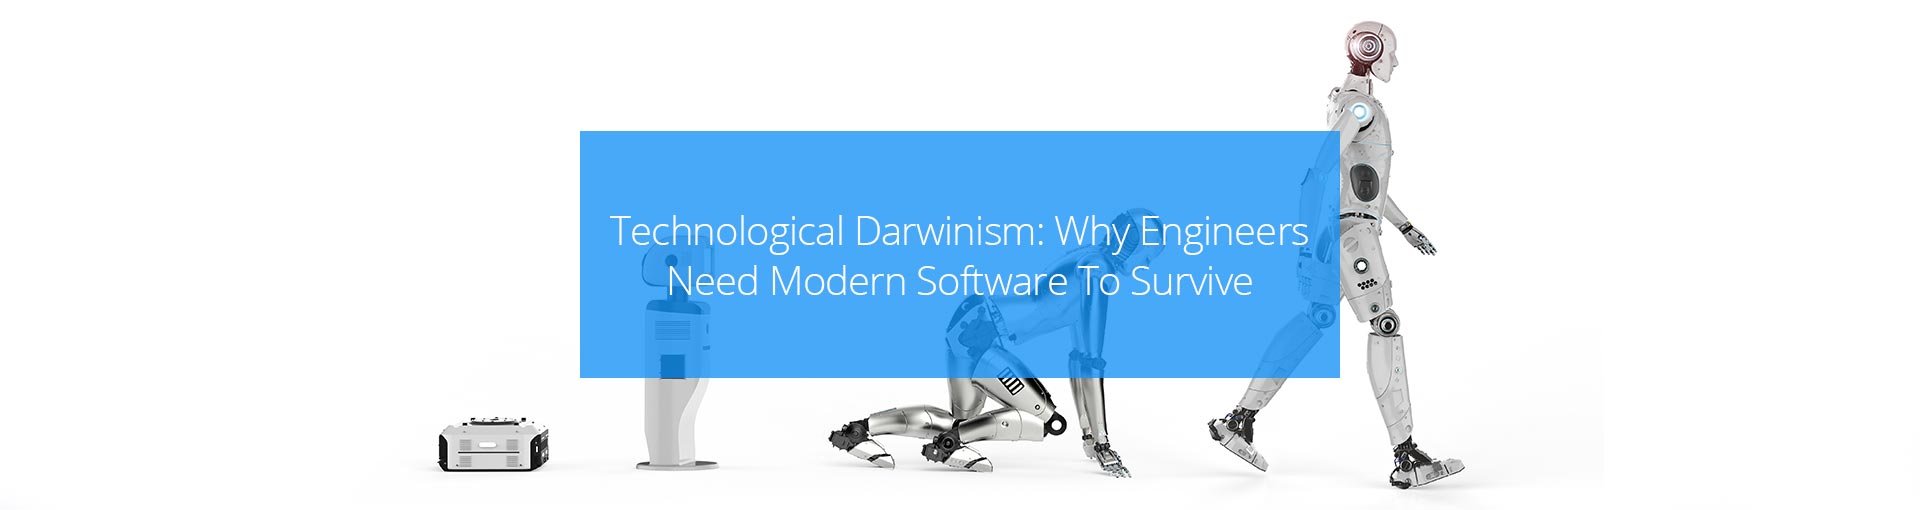 Technological Darwinism: Why Engineers Need Modern Software To Survive Featured Image